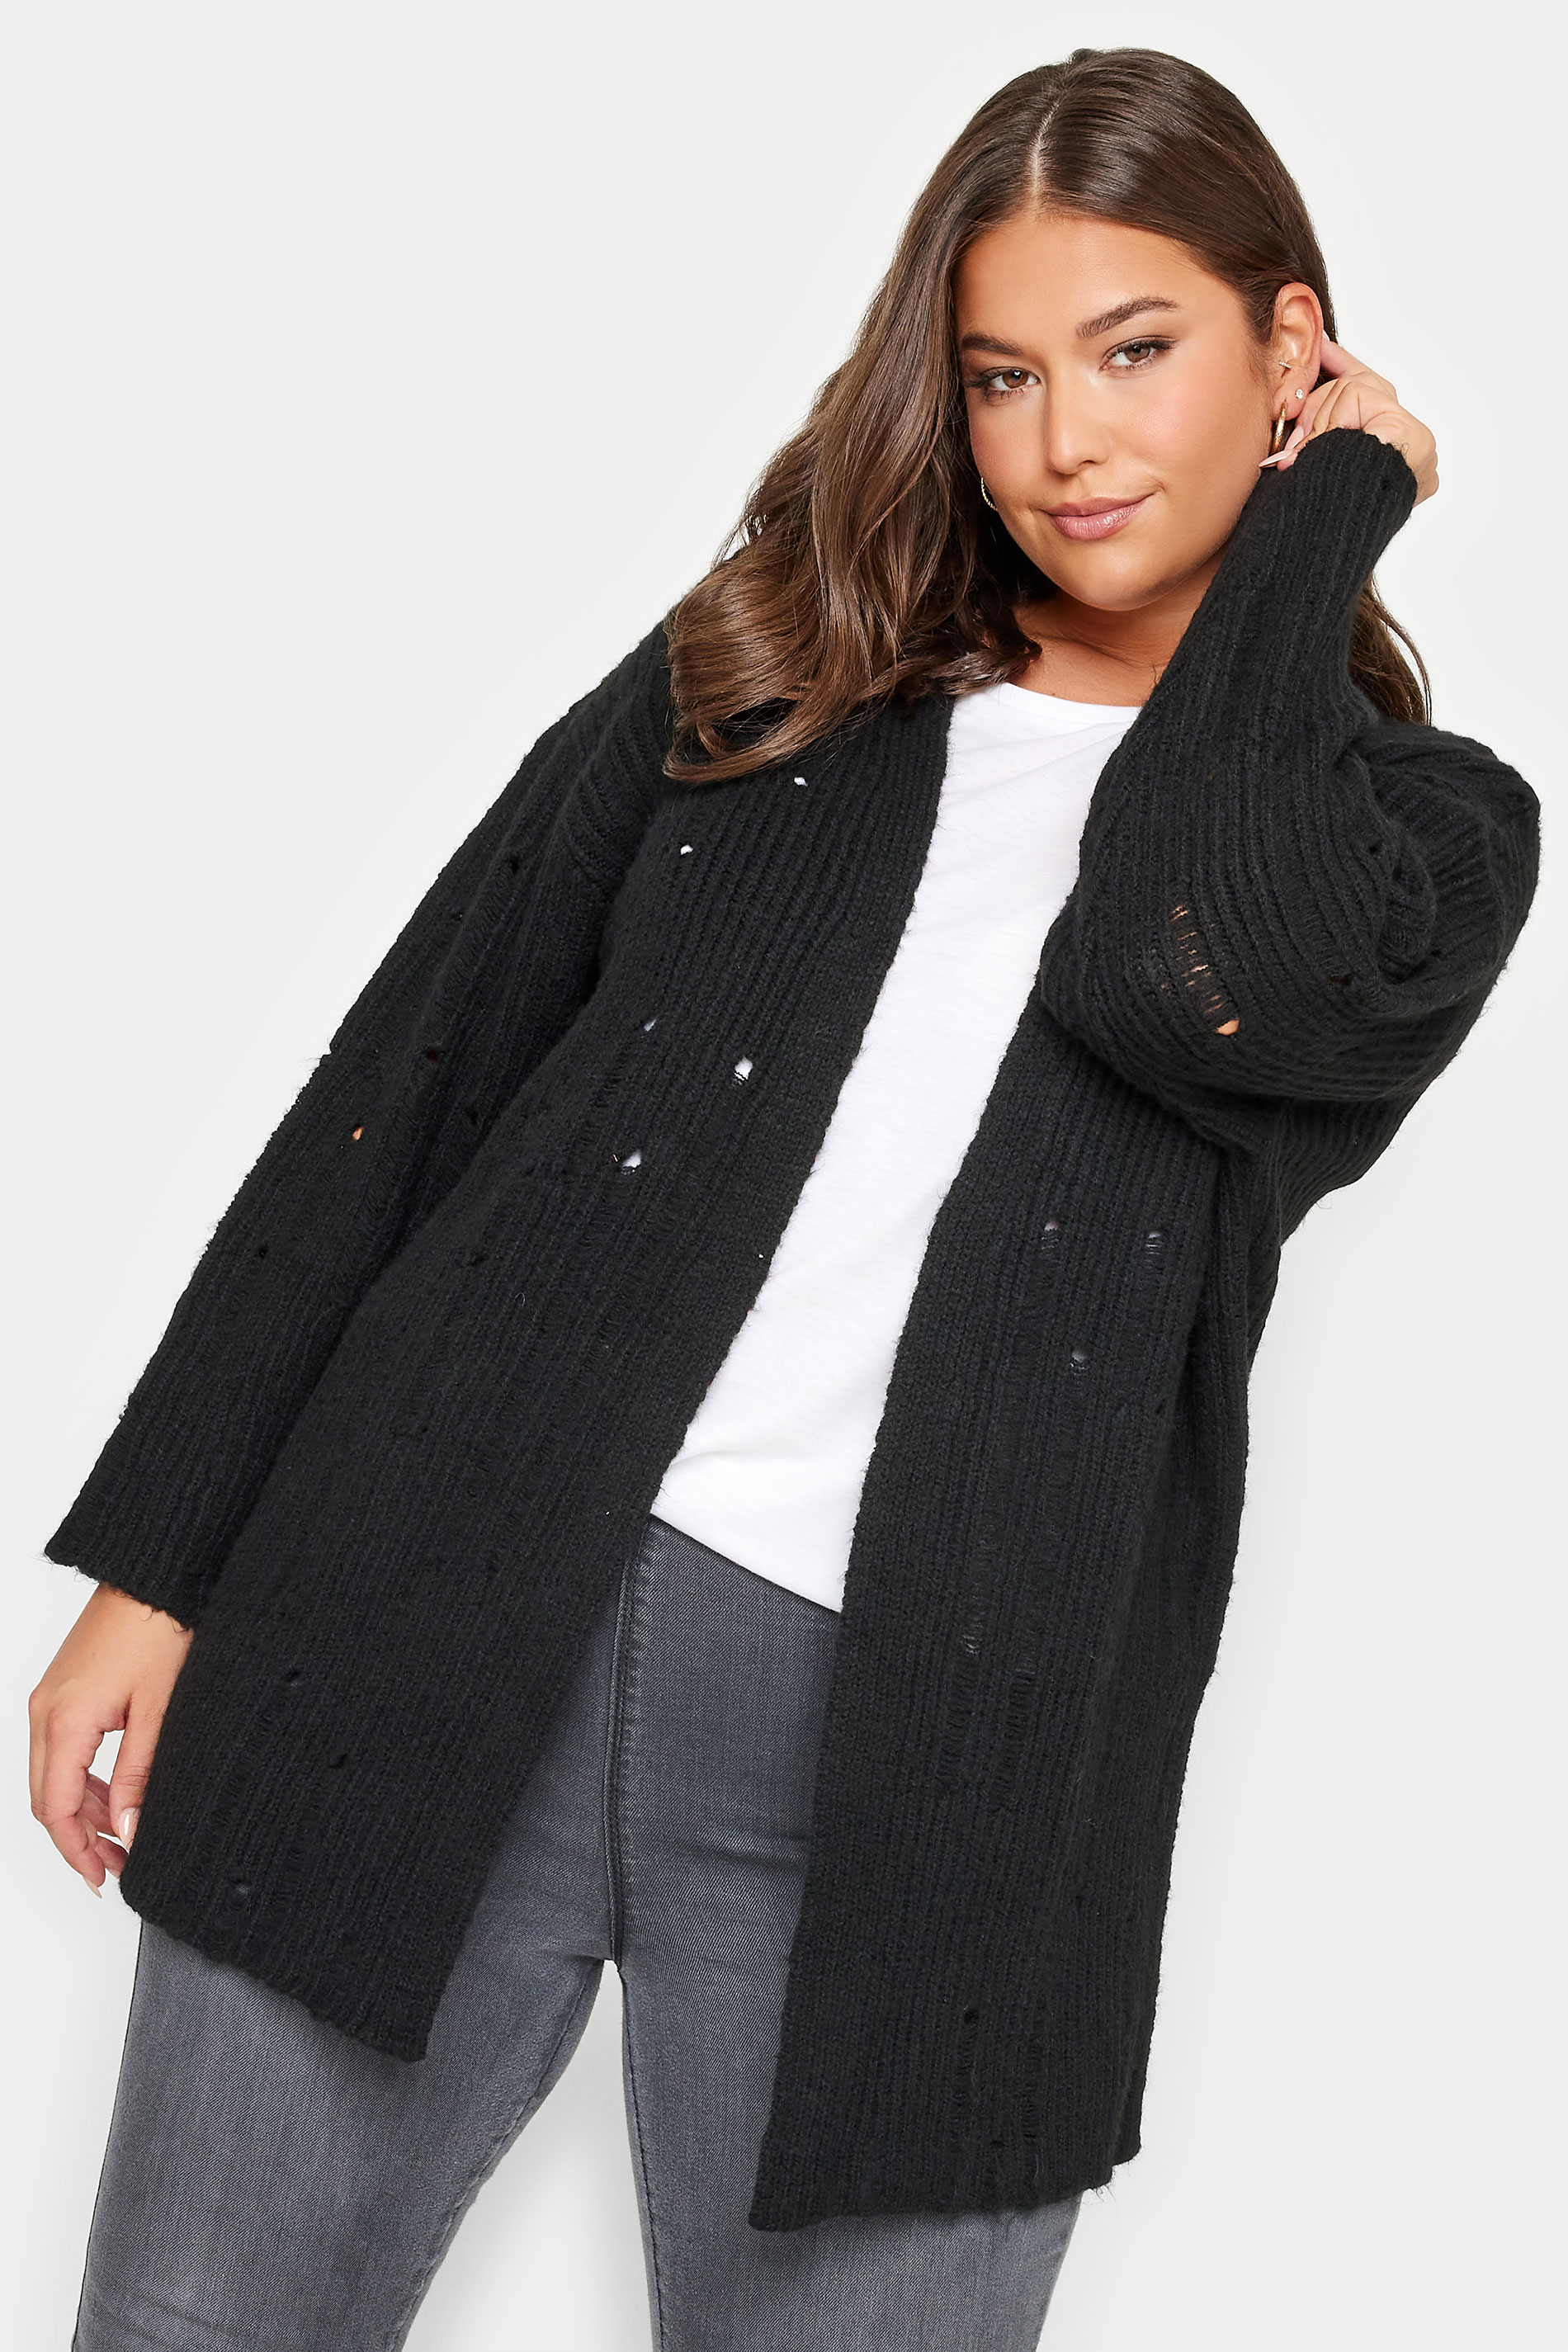 YOURS Plus Size Black Distressed Knit Cardigan | Yours Clothing 1